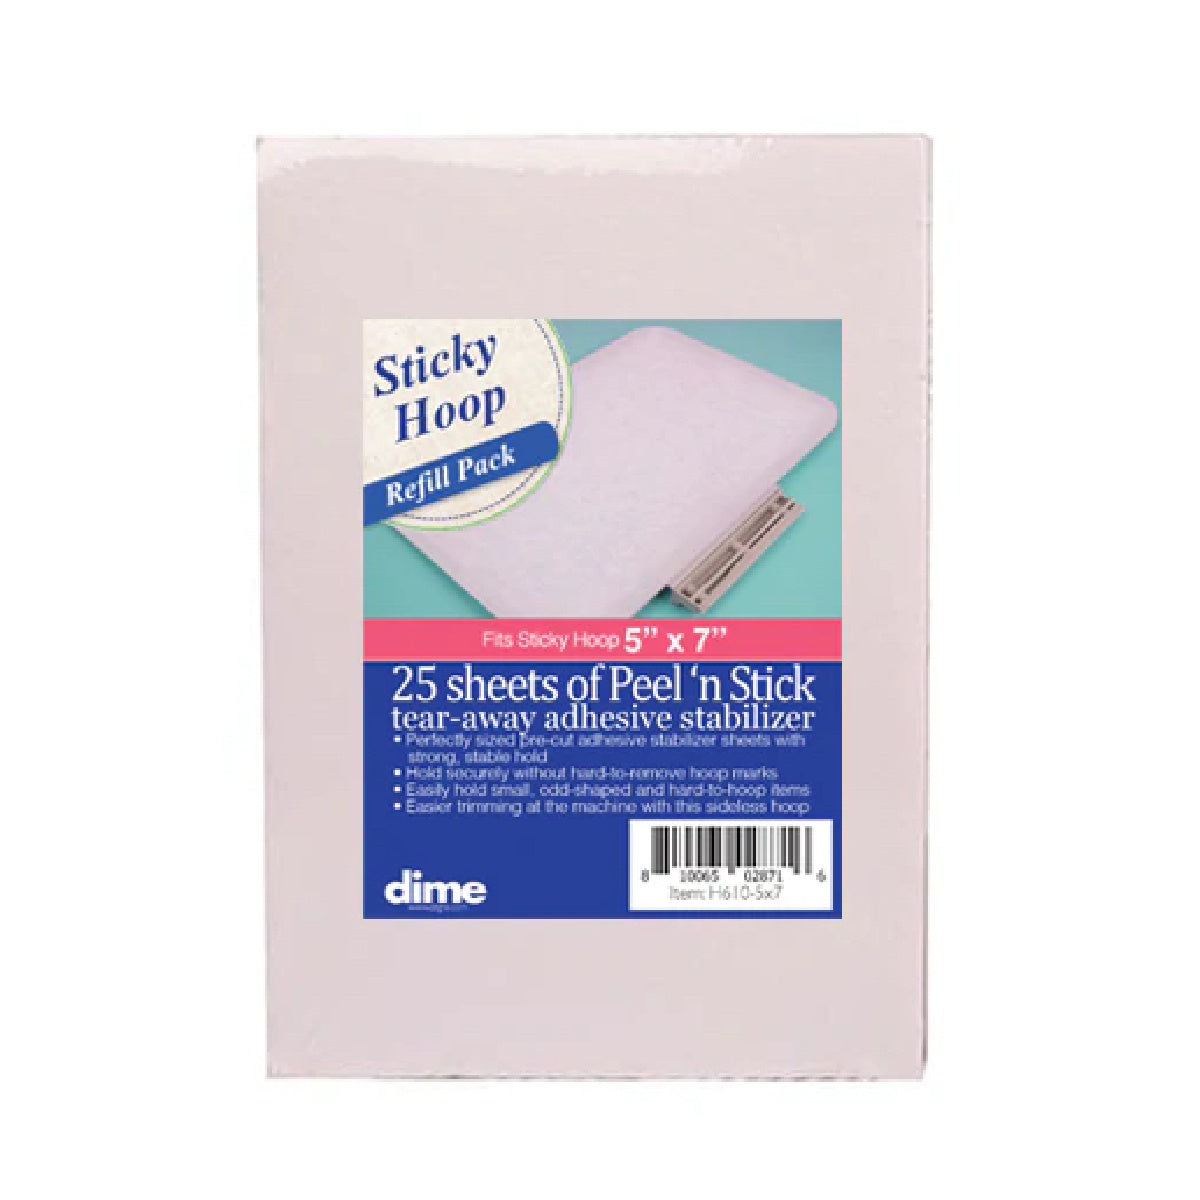 STICKY HOOP REFILL PACK 5" X 7"